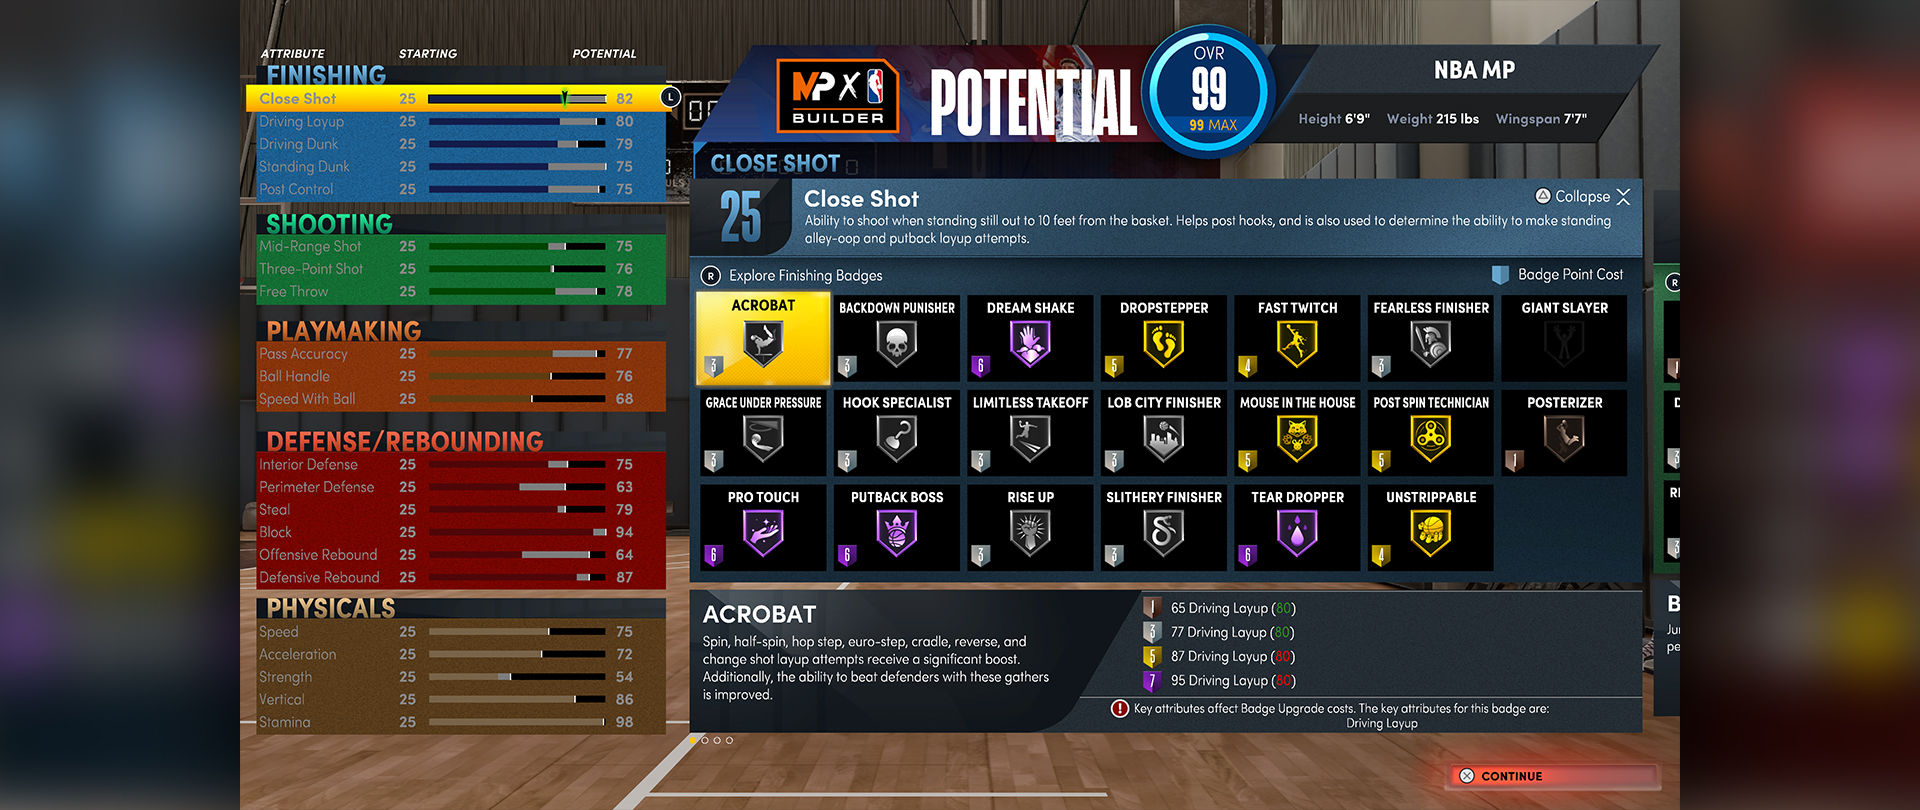 MyPLAYER Builder Potential Badge Points